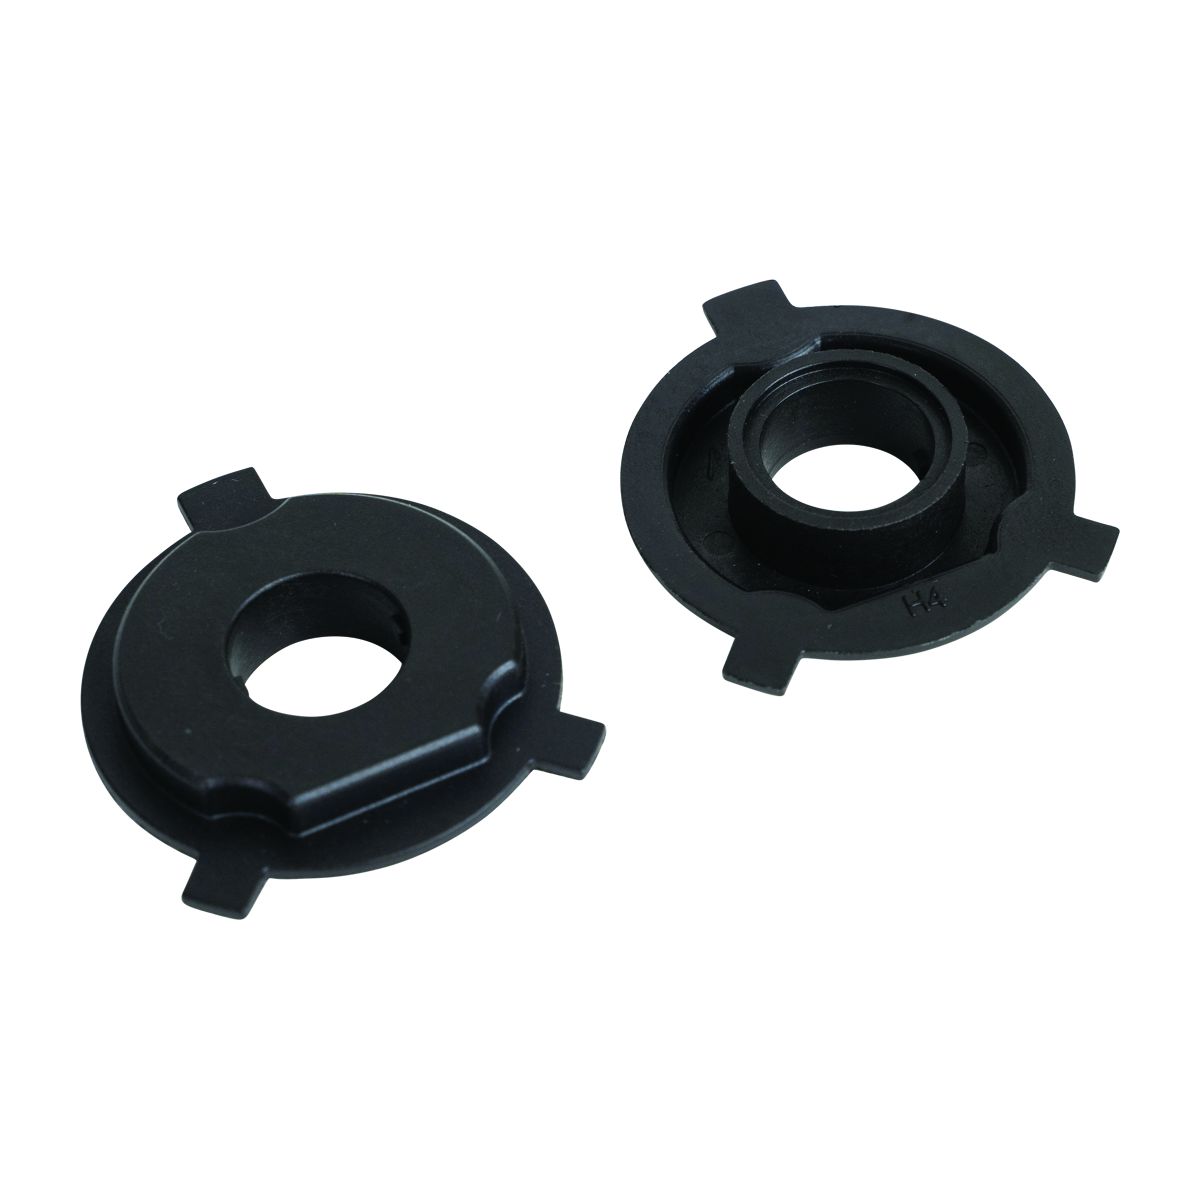 CLD CLDKGH4RING - Replacement Ring for Kong H4 (2)